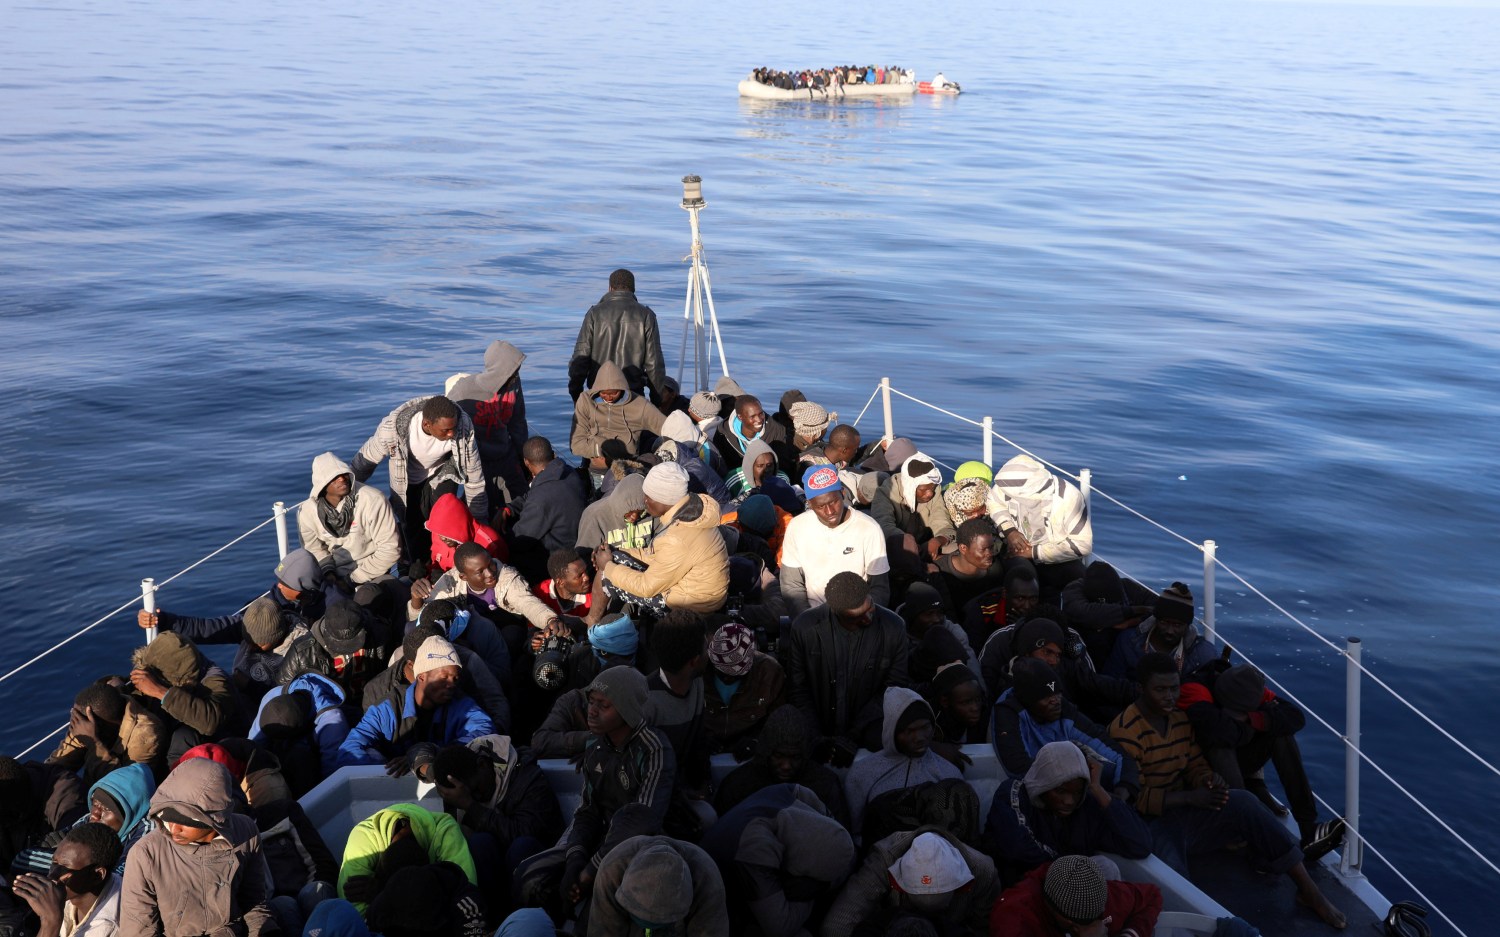 Migrants are seen as they are rescued by Libyan coast guards in the Mediterranean Sea off the coast of Libya, January 15, 2018. Picture taken January 15, 2018. REUTERS/Hani Amara - RC18027683D0